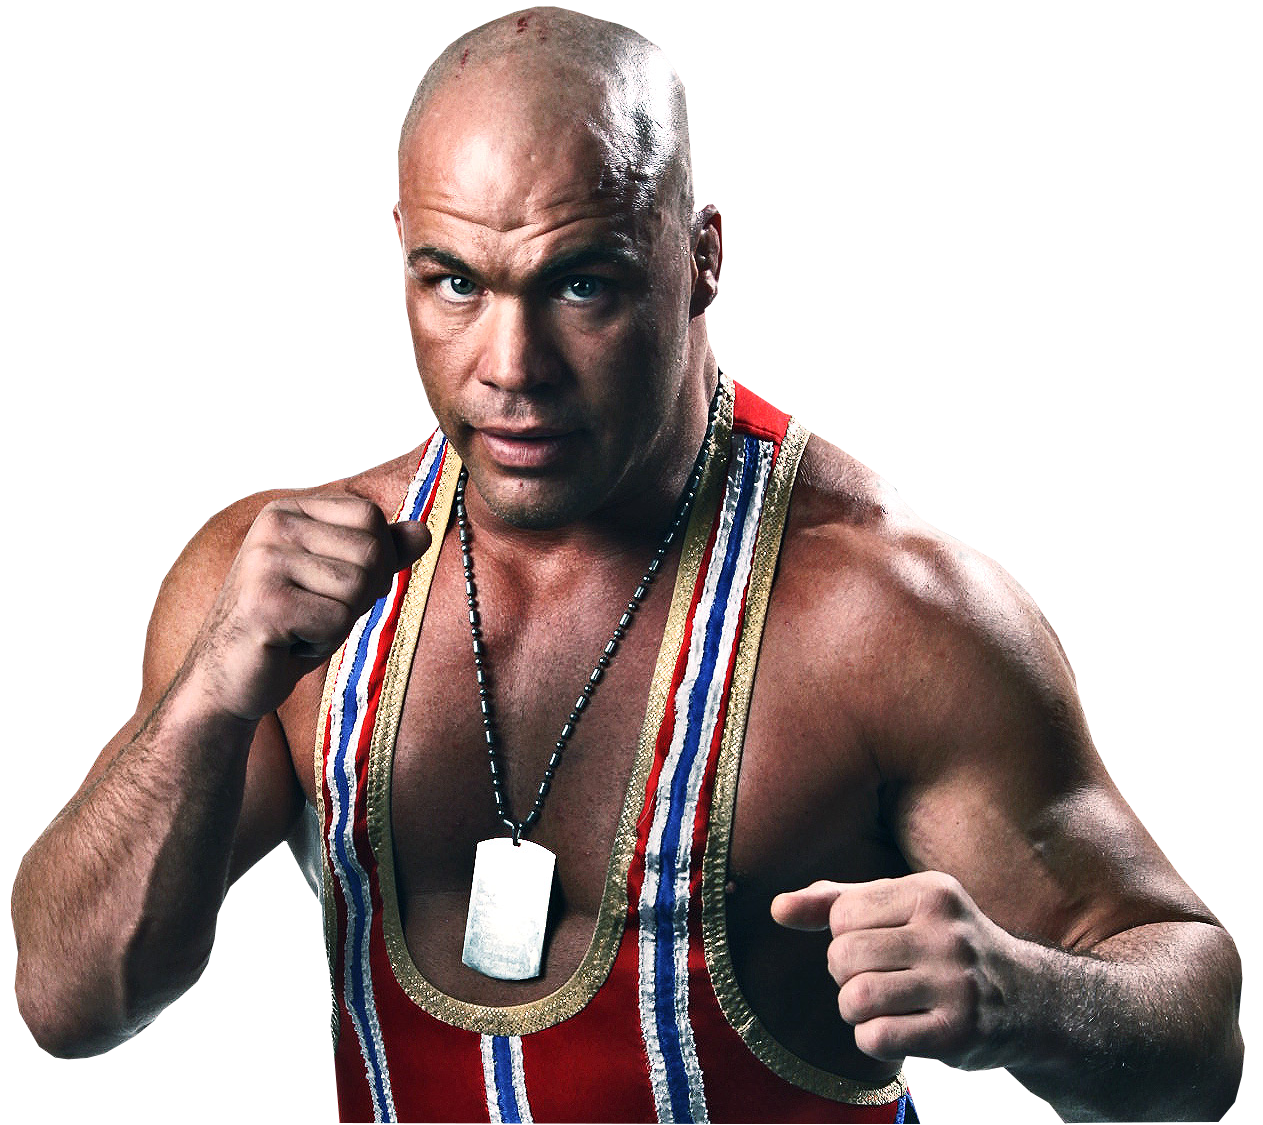 The Sports Archives Blog - The Sports Archives - Is Kurt Angle's Olympic Desire Genuine or a Publicity Stunt?